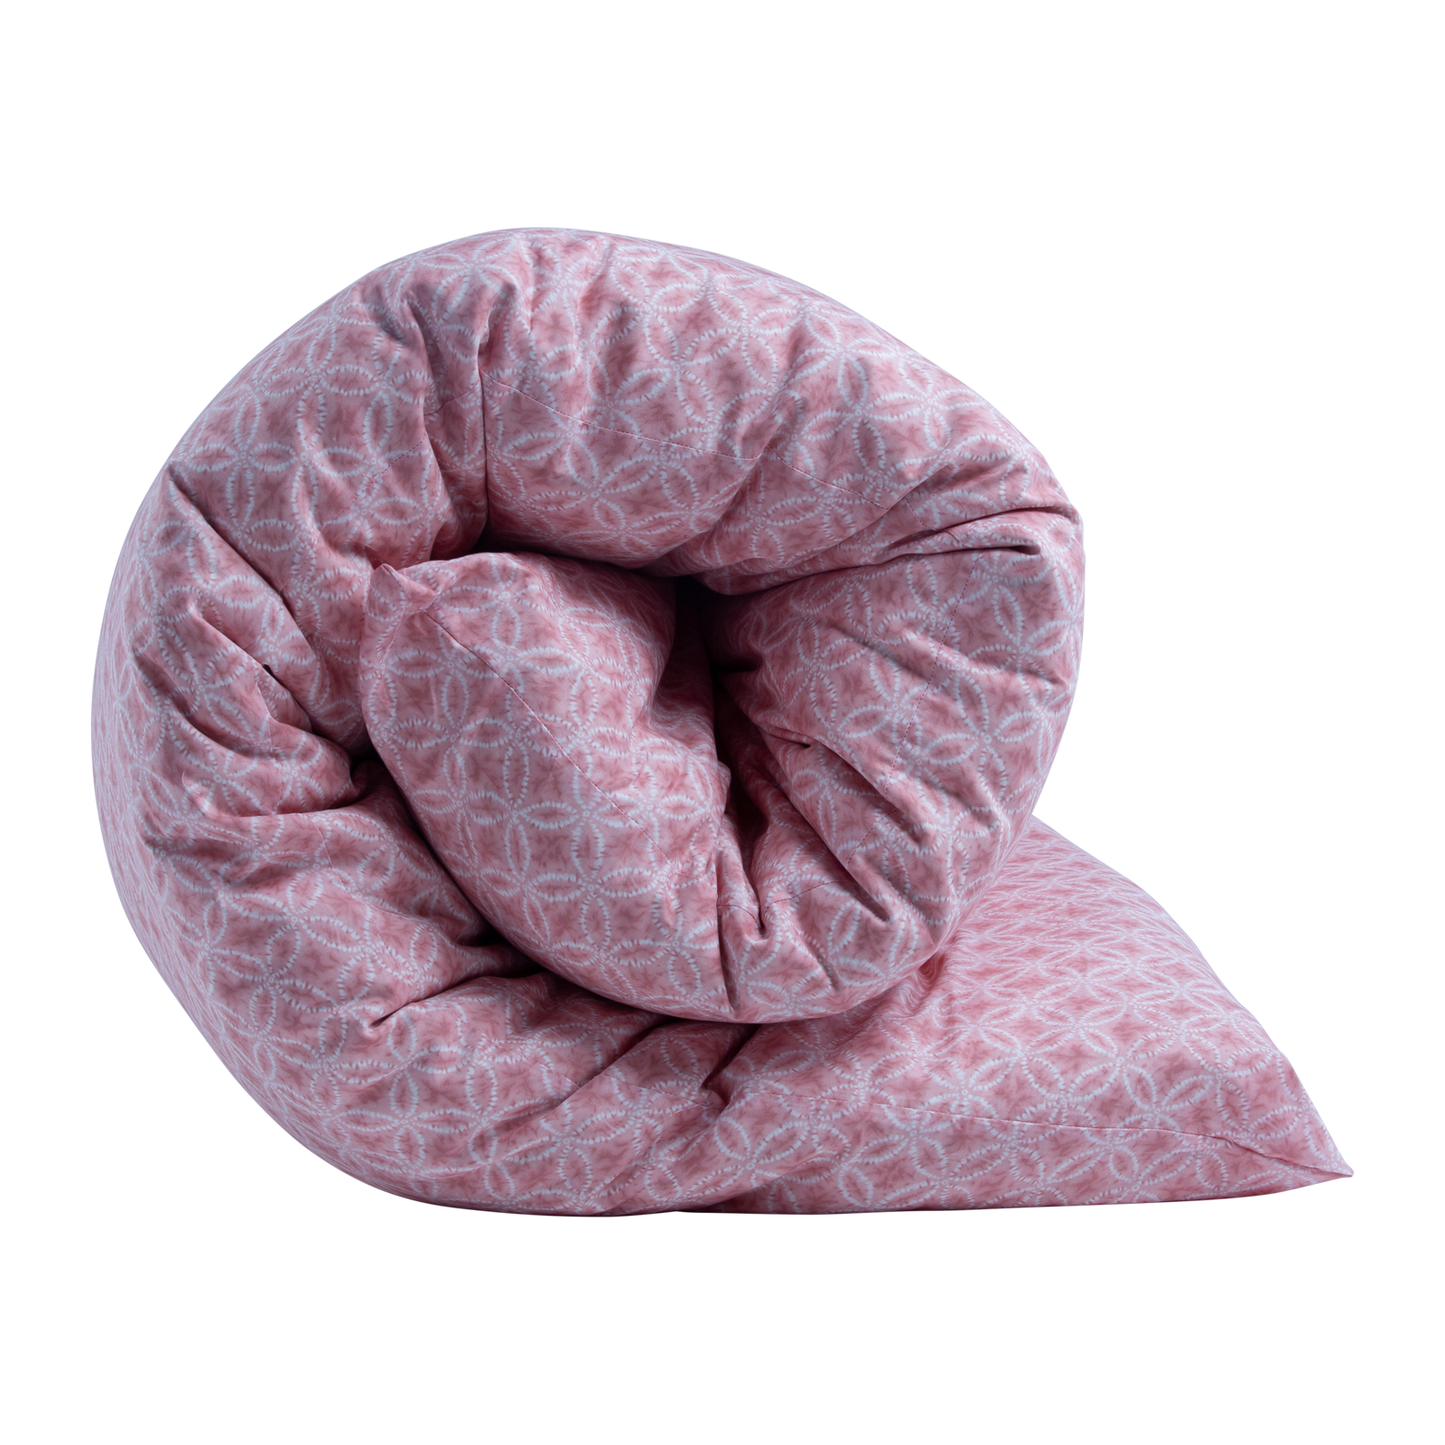 Shiki Futon Taidai Pink Removable COVER ONLY